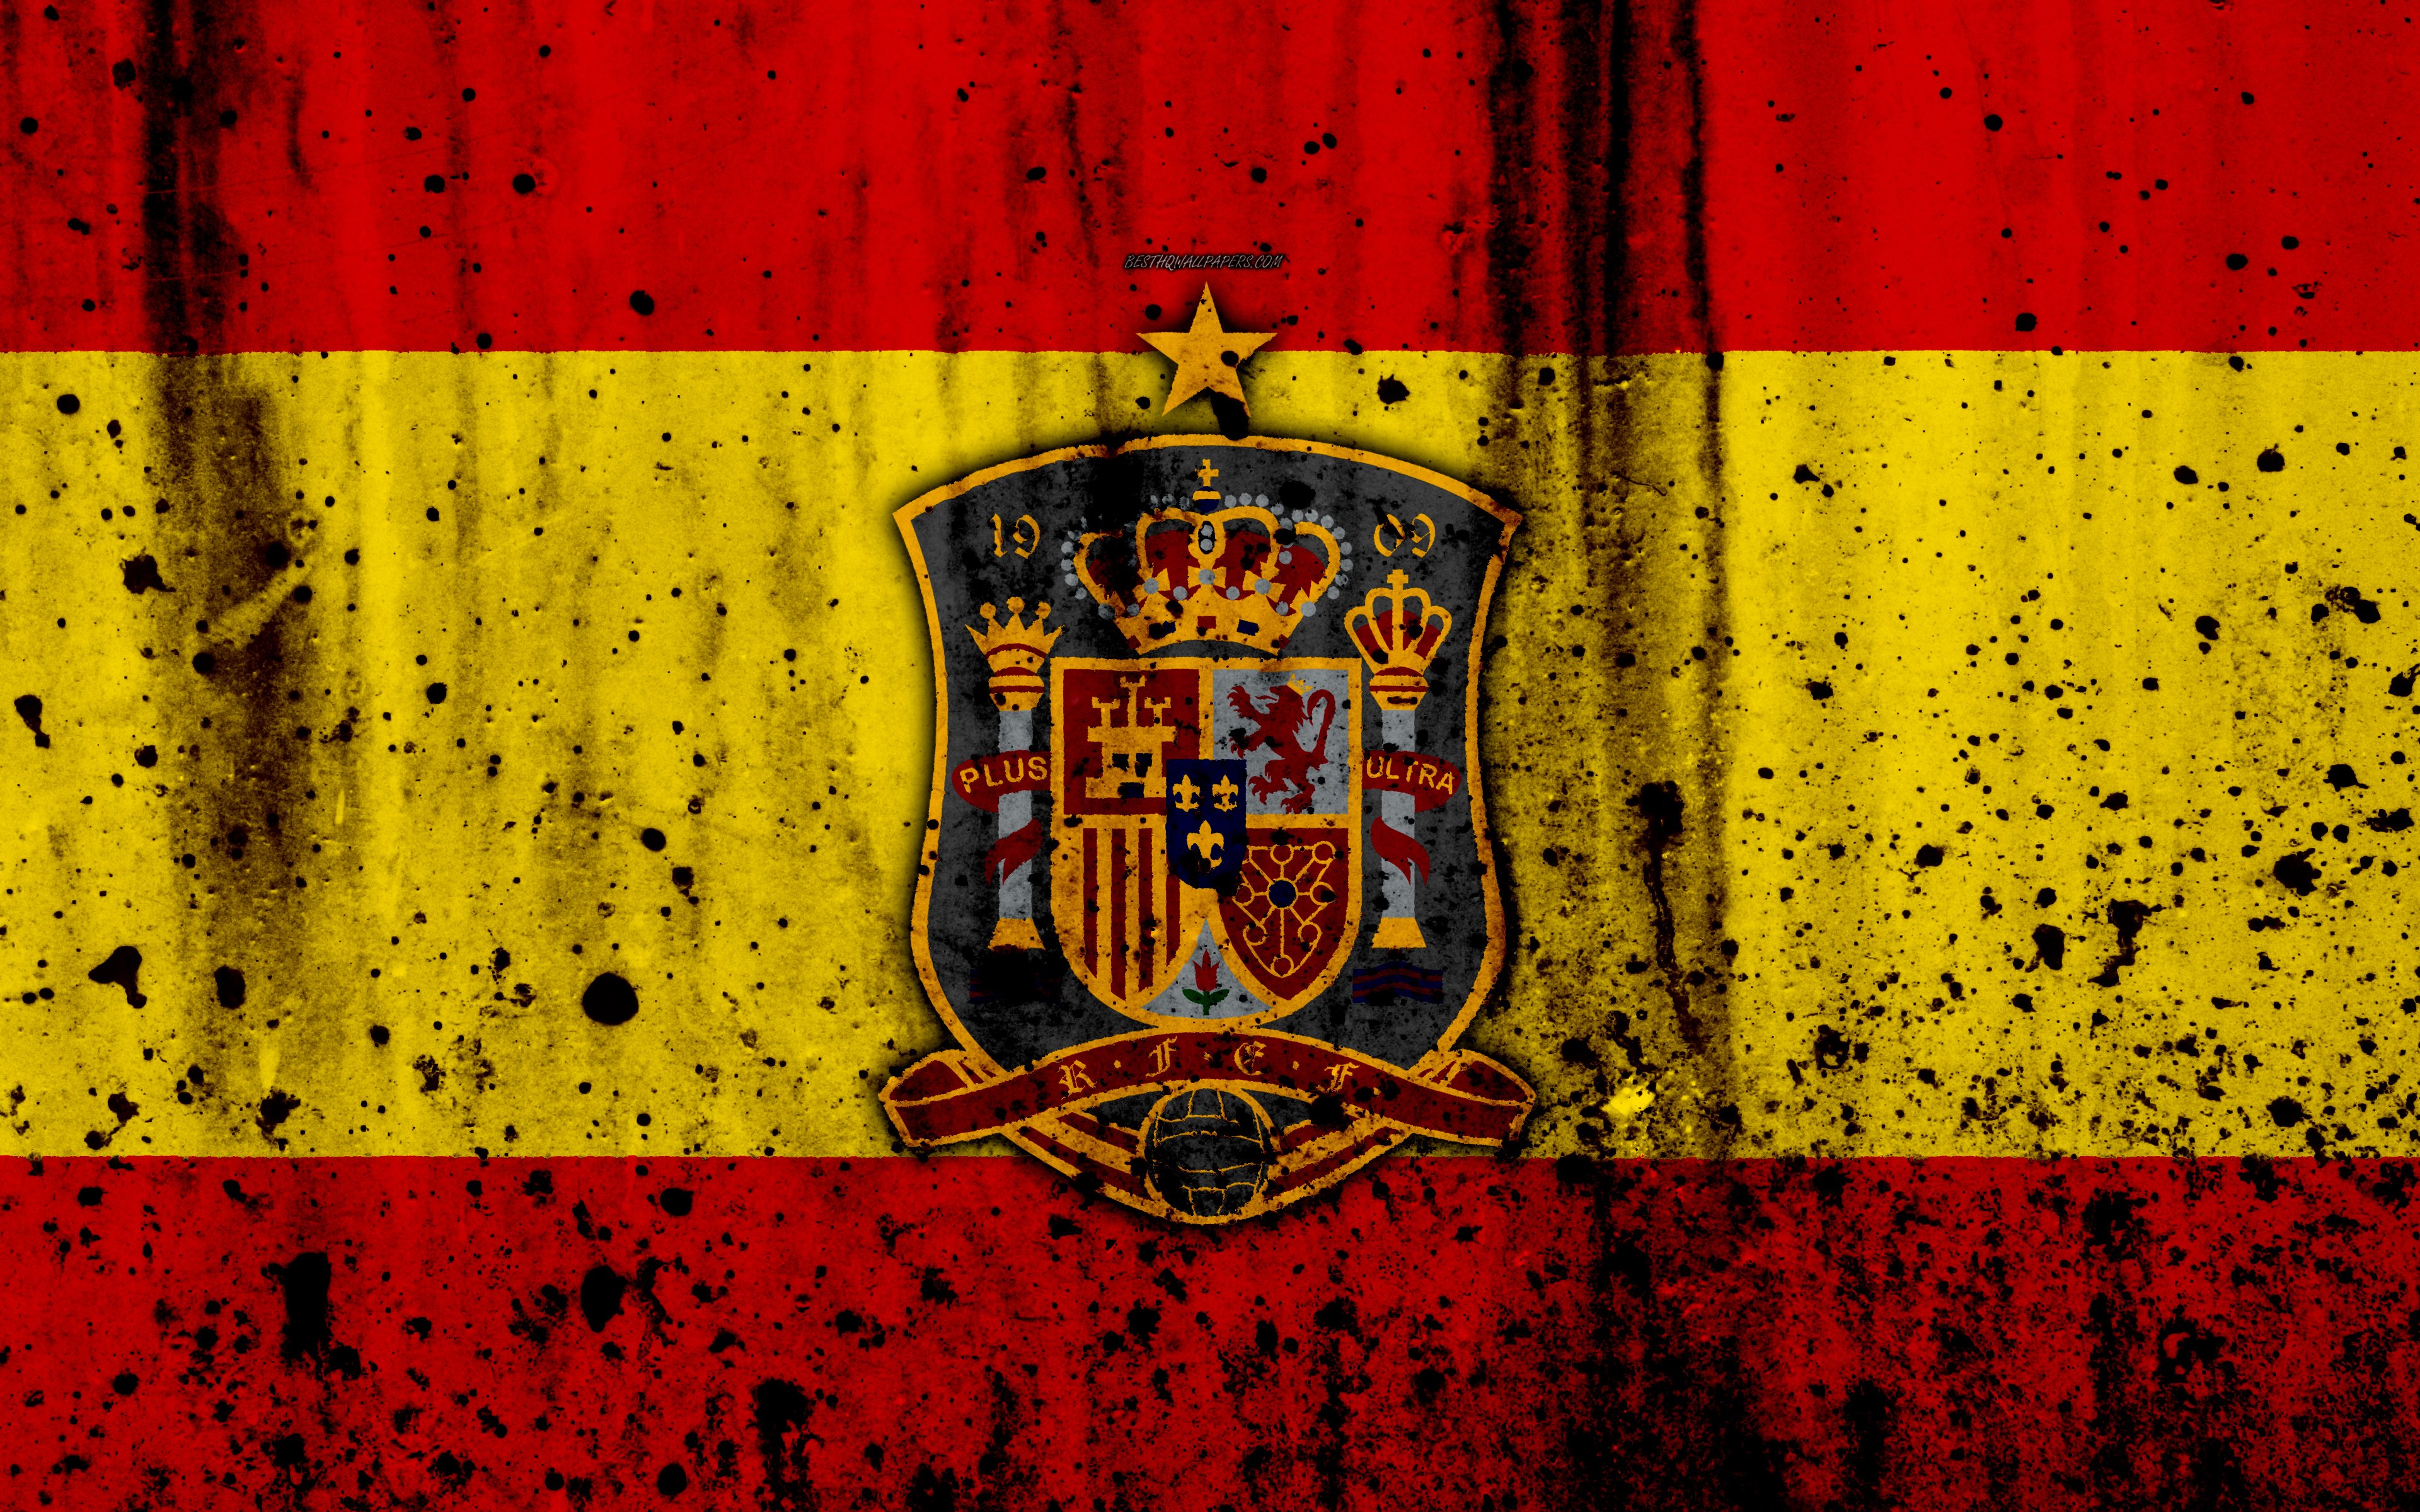 Download wallpaper Spain national football team, 4k, logo, grunge, Europe, football, stone texture, soccer, Spain, European national teams for desktop with resolution 3840x2400. High Quality HD picture wallpaper